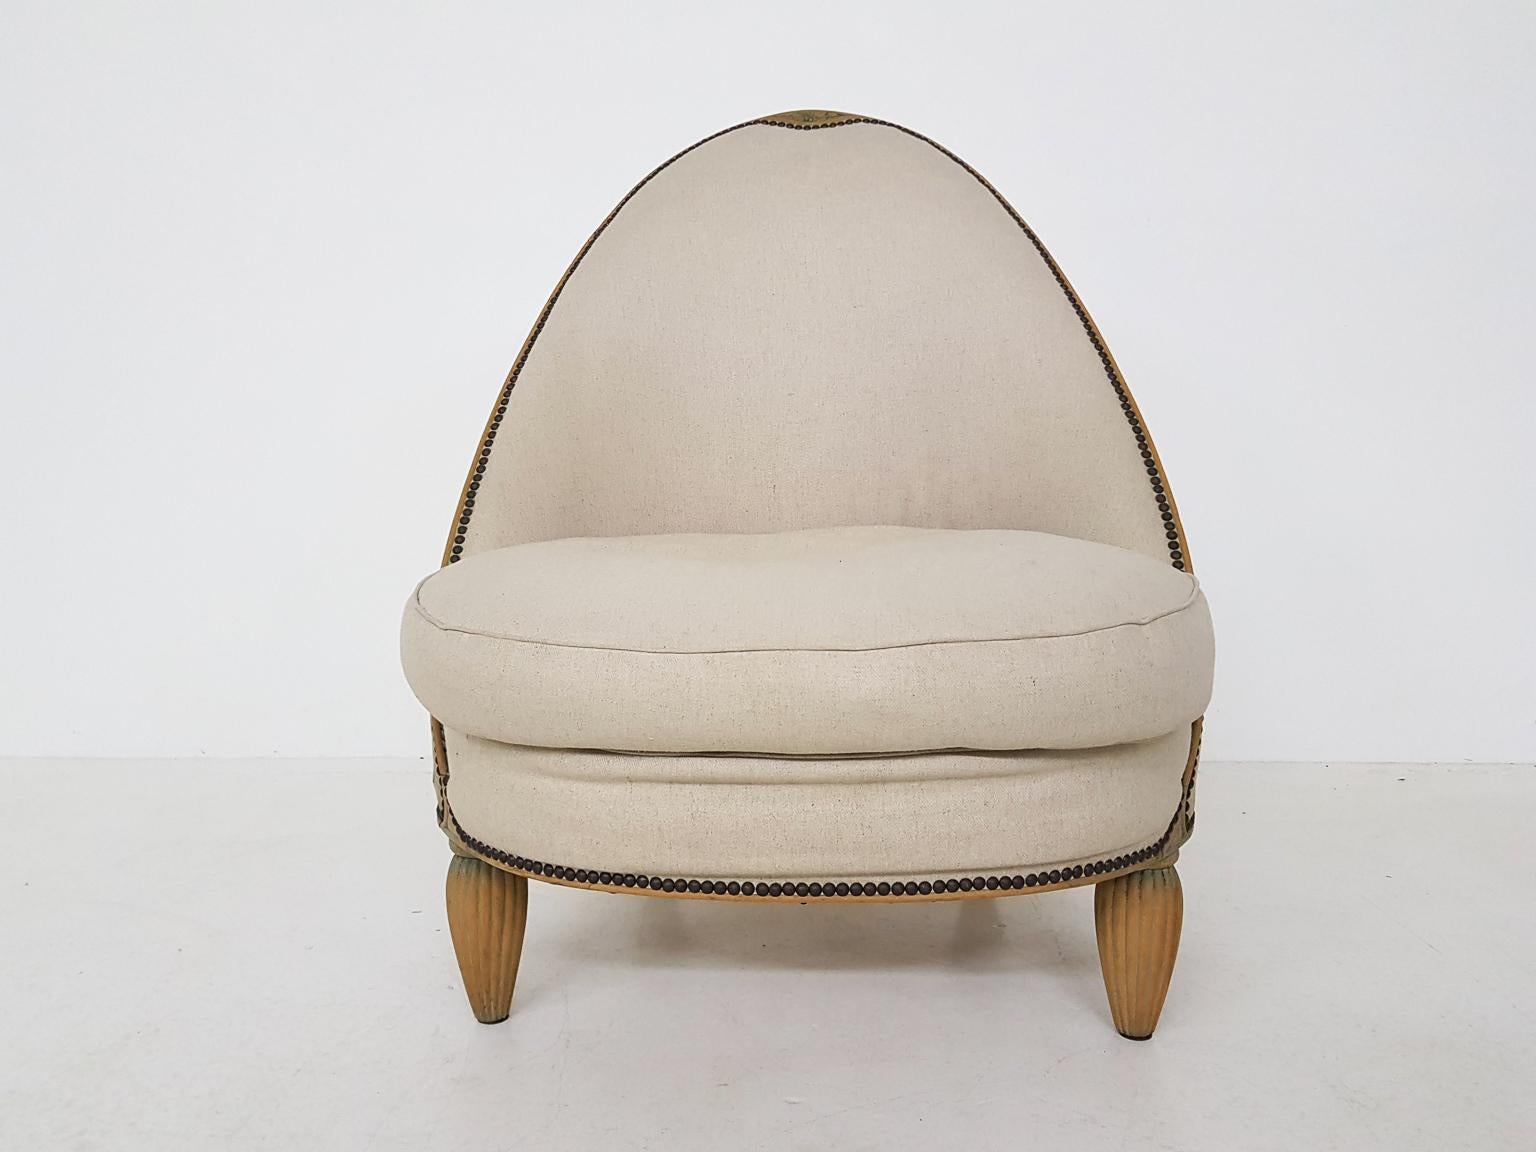 A nice slipper, salon or lounge chair in the style of Art Deco. The chair is in original condition. It has a wooden frame with nice ribbed wooden legs. Its high sharp rounded back still looks very sleek and modern. The fabric is original with traces